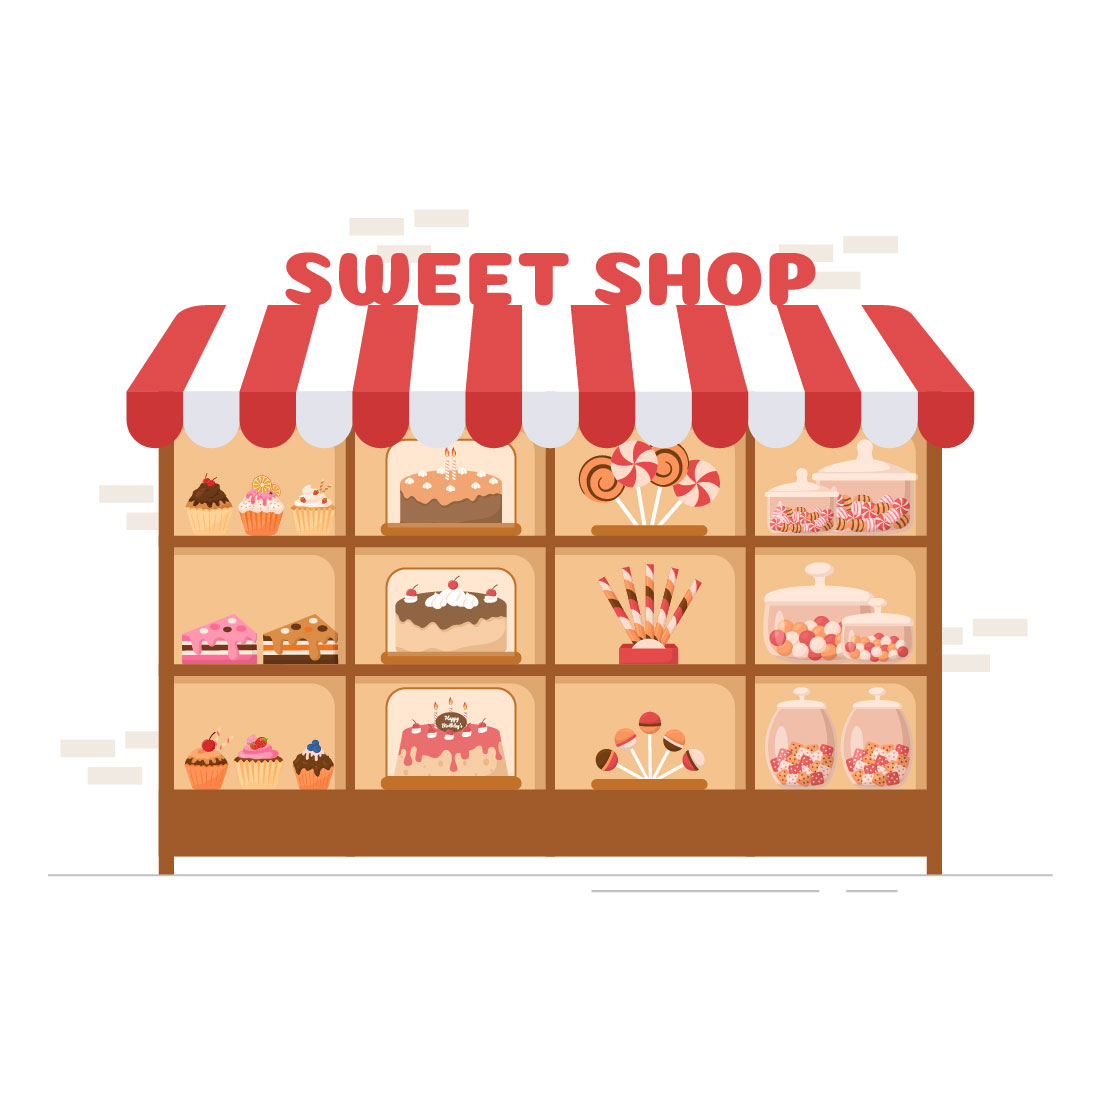 Enchanting image with a sweet shop.